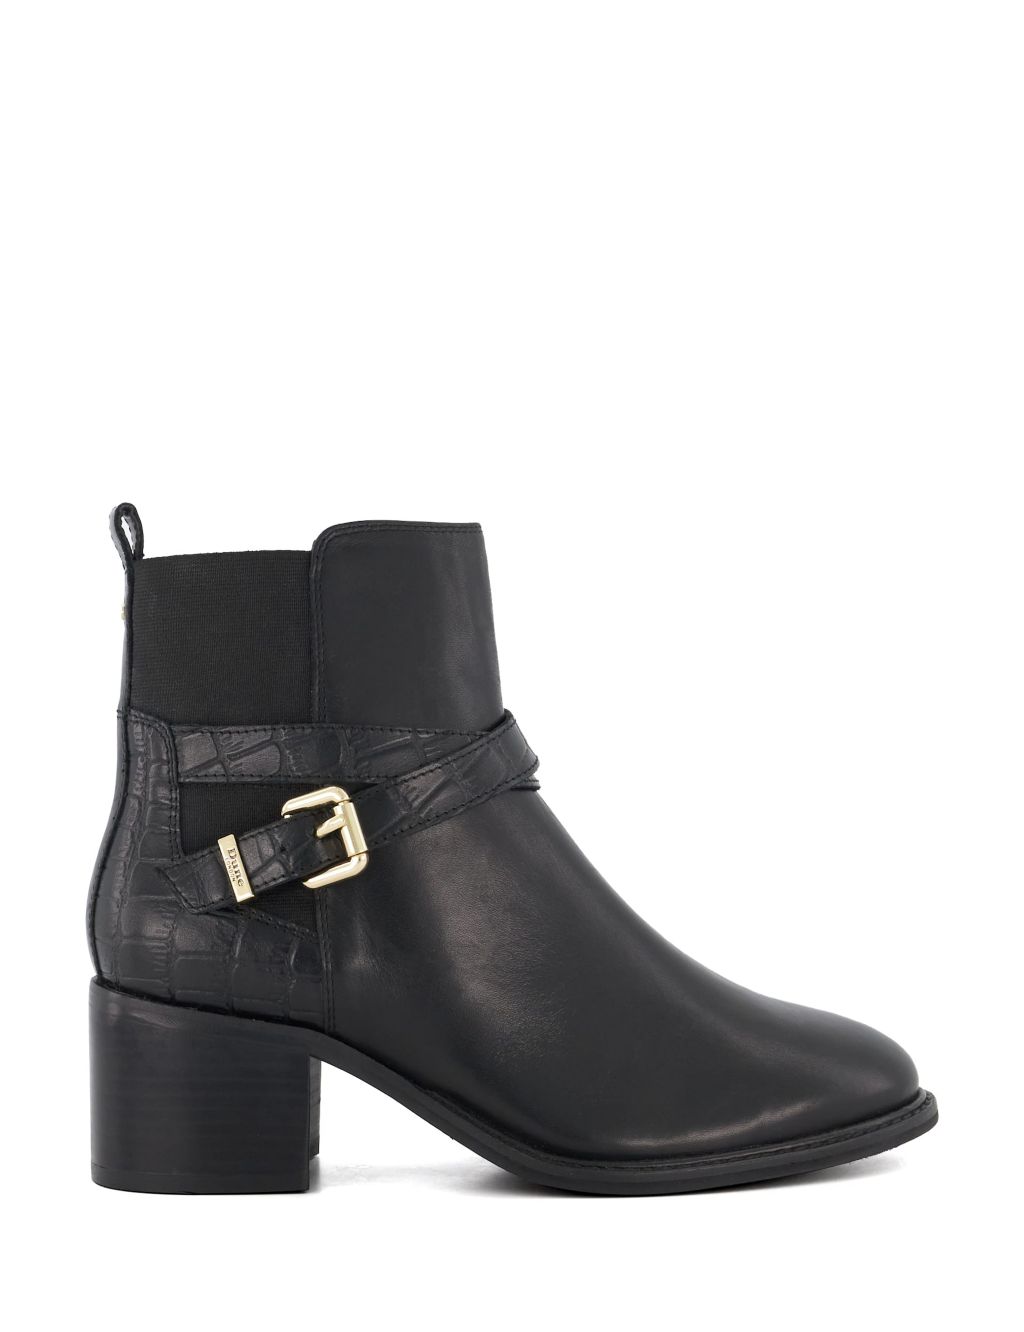 Leather Buckle Block Heel Ankle Boots 3 of 4